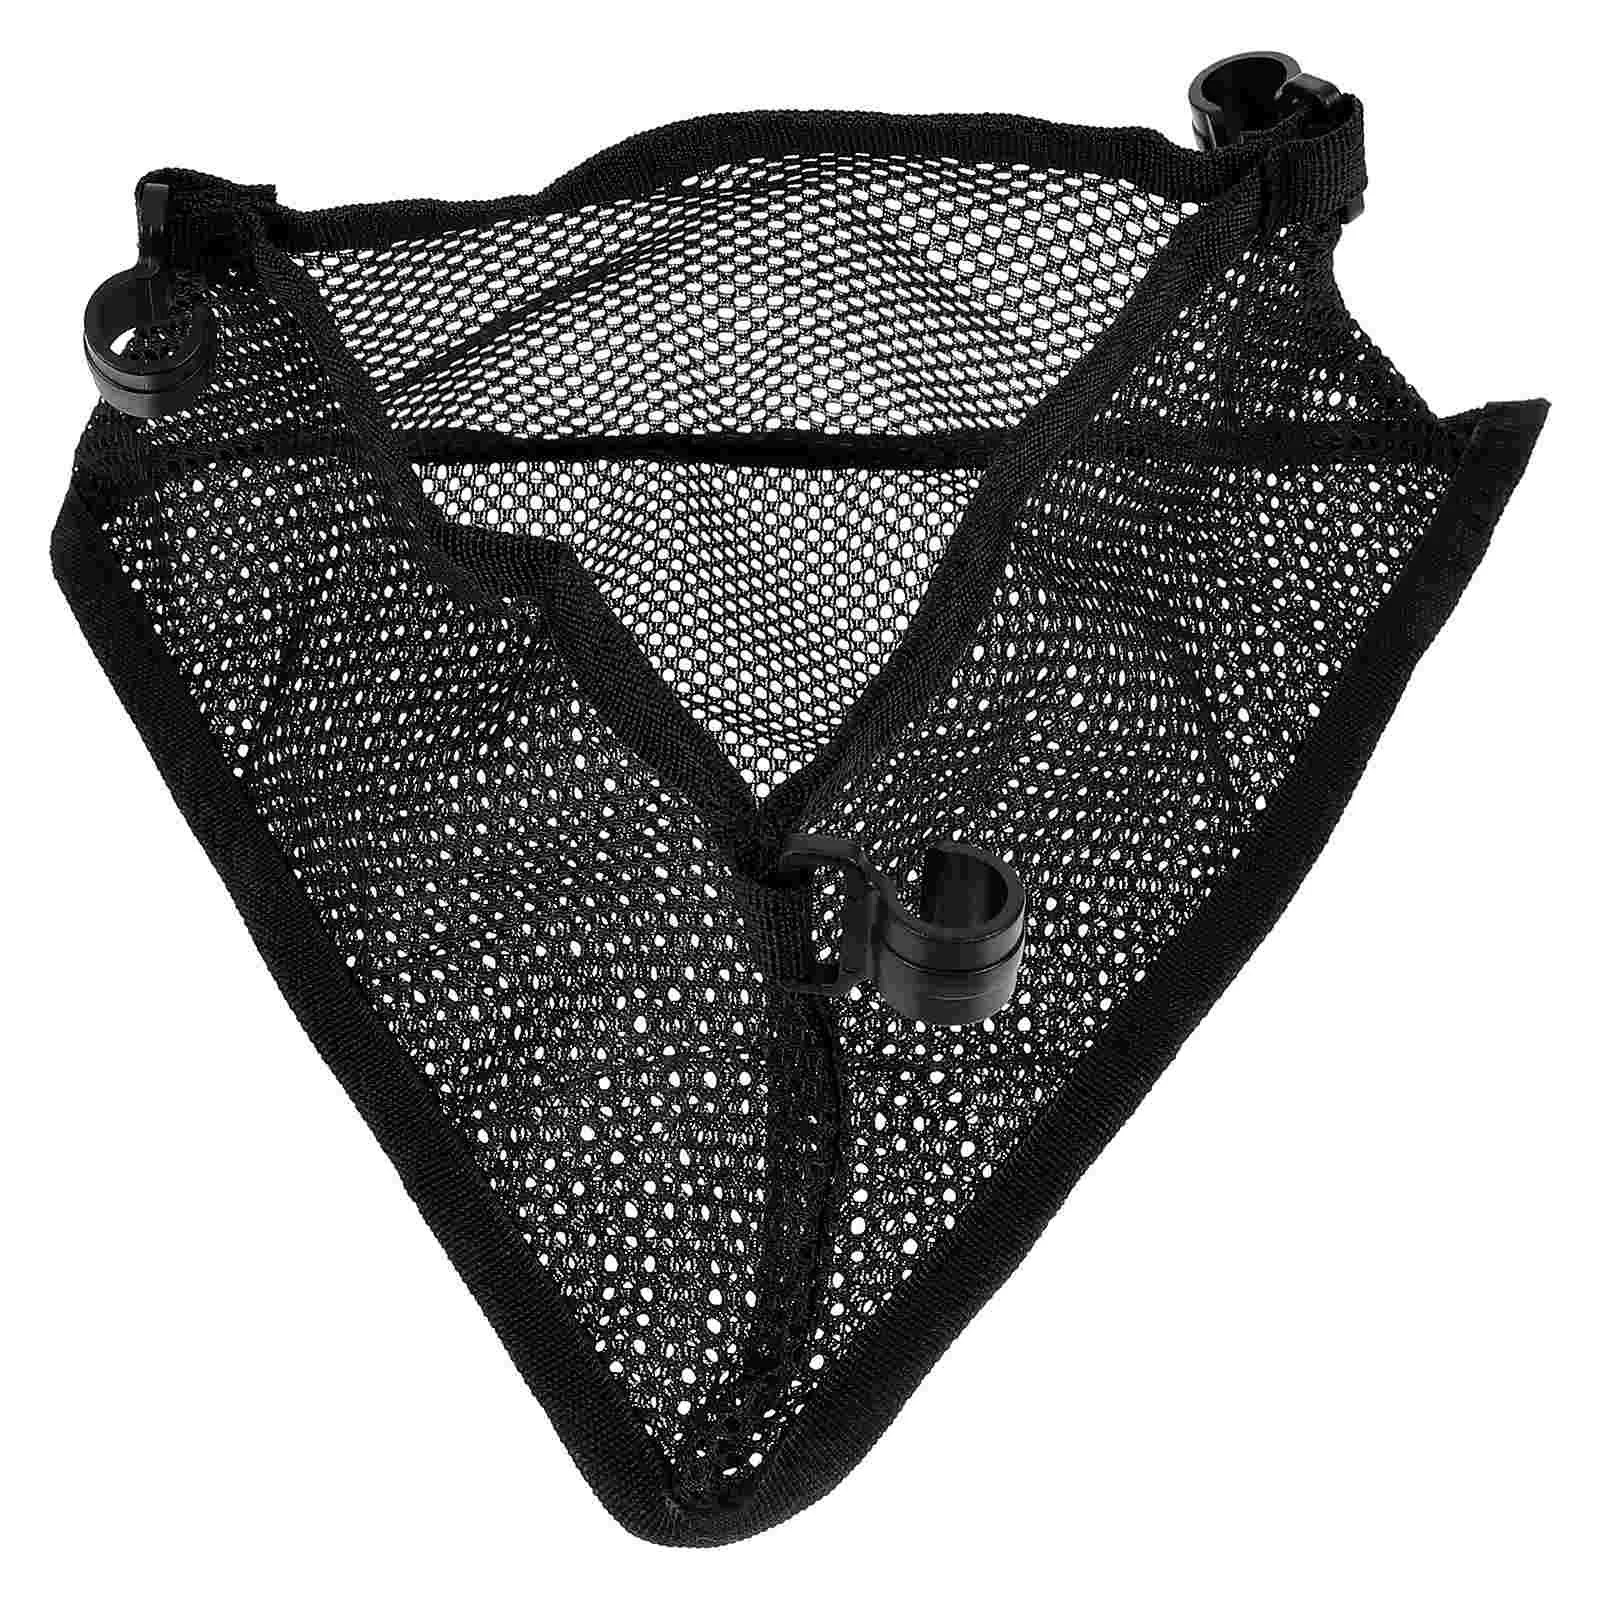 

Folding Camp Table Chairs The Mesh Pouch Hanging Bag Camping Sundries Organizer Suspended Net Netting Desk Accessories